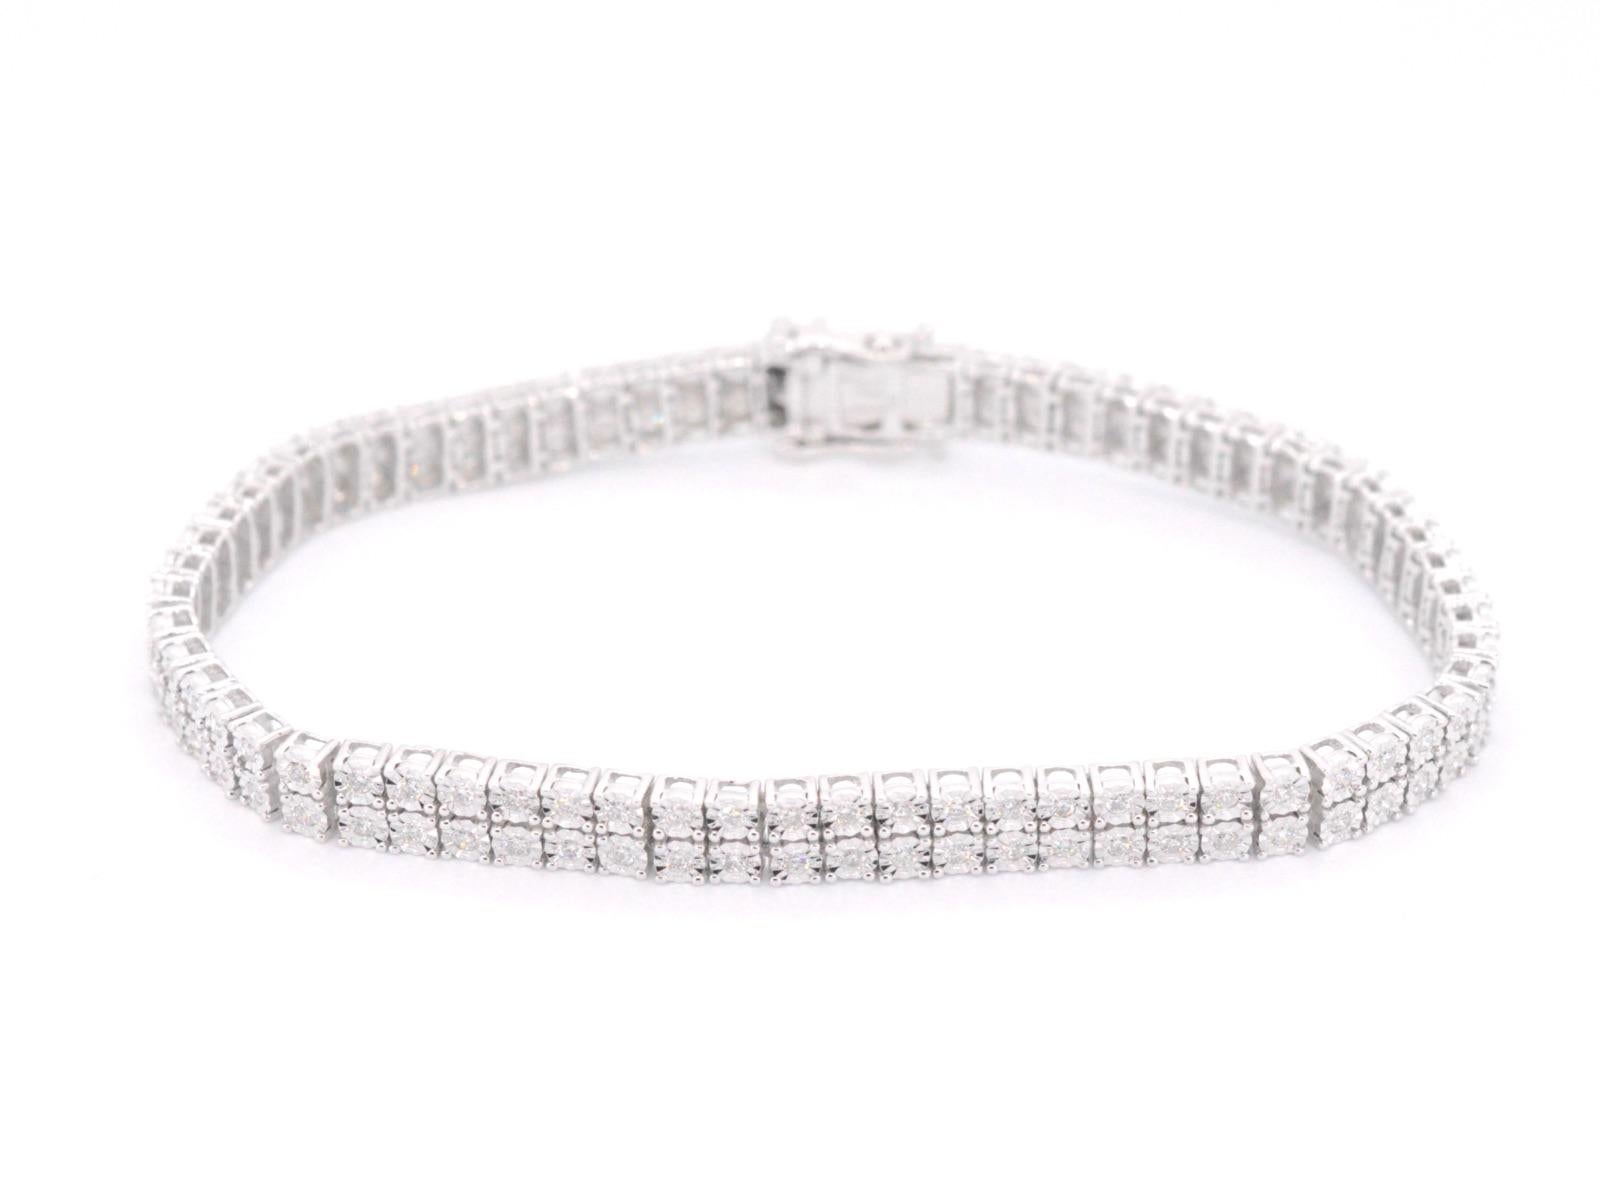 A white gold tennis bracelet with 2 rows of diamonds totaling 1.50 carats is a dazzling piece of jewelry that features rows of sparkling diamonds set in a band of lustrous white gold. The 1.50 carat weight of the diamonds makes this bracelet a truly